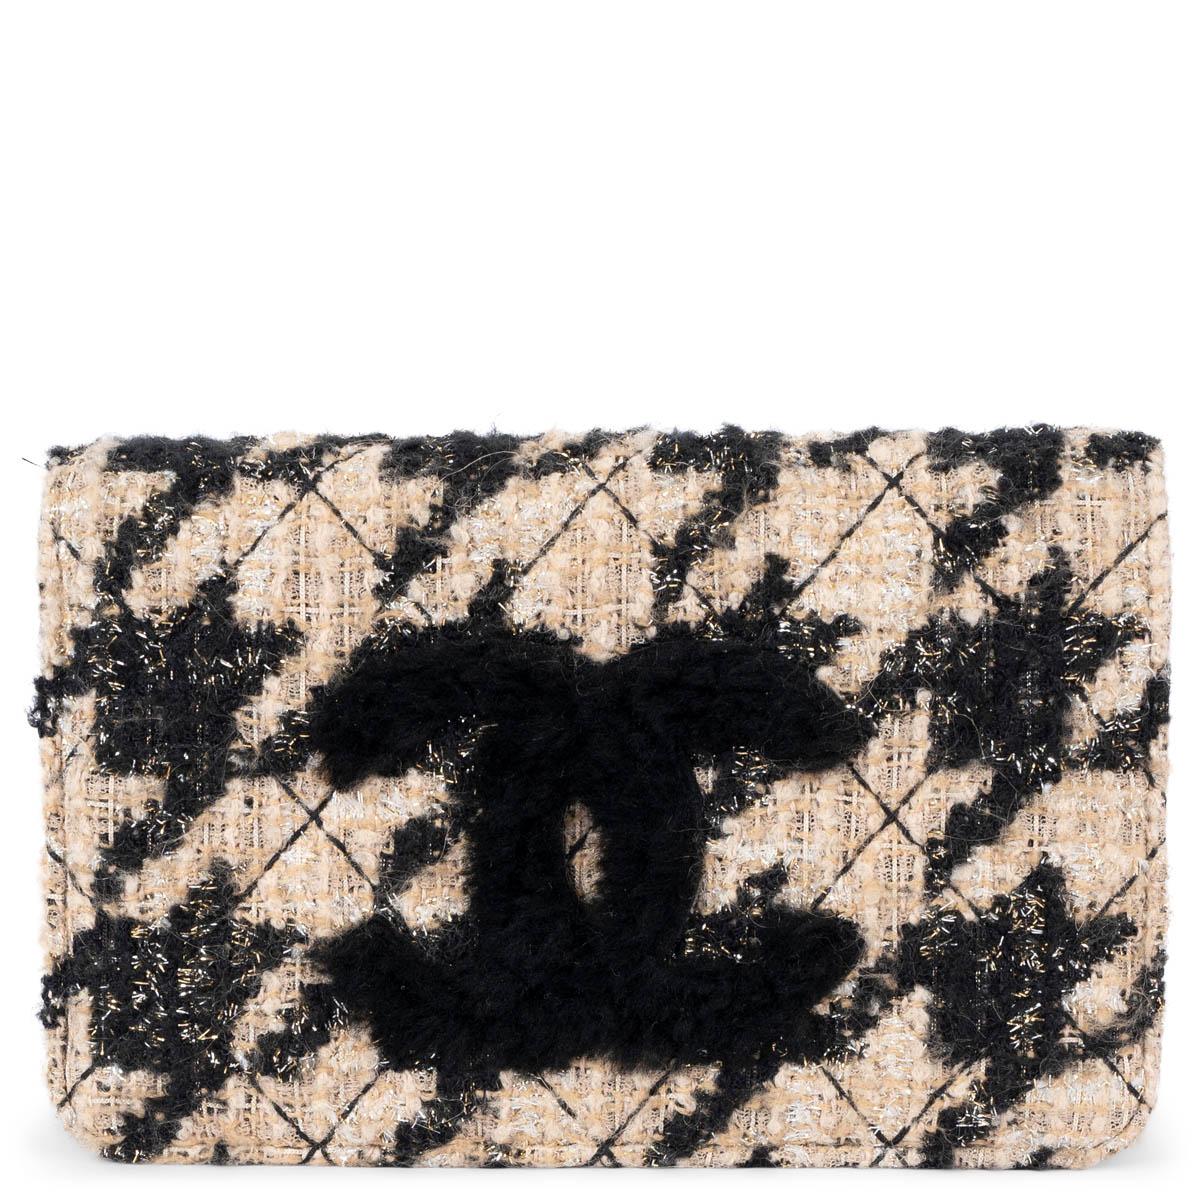 100% authentic Chanel houndstooth wallet on chain in beige and black tweed with lurex. The design features a black shearling CC on the flap and and a detachable round pouch. The bag opens with a magnetic button to a beige leather lined interior with